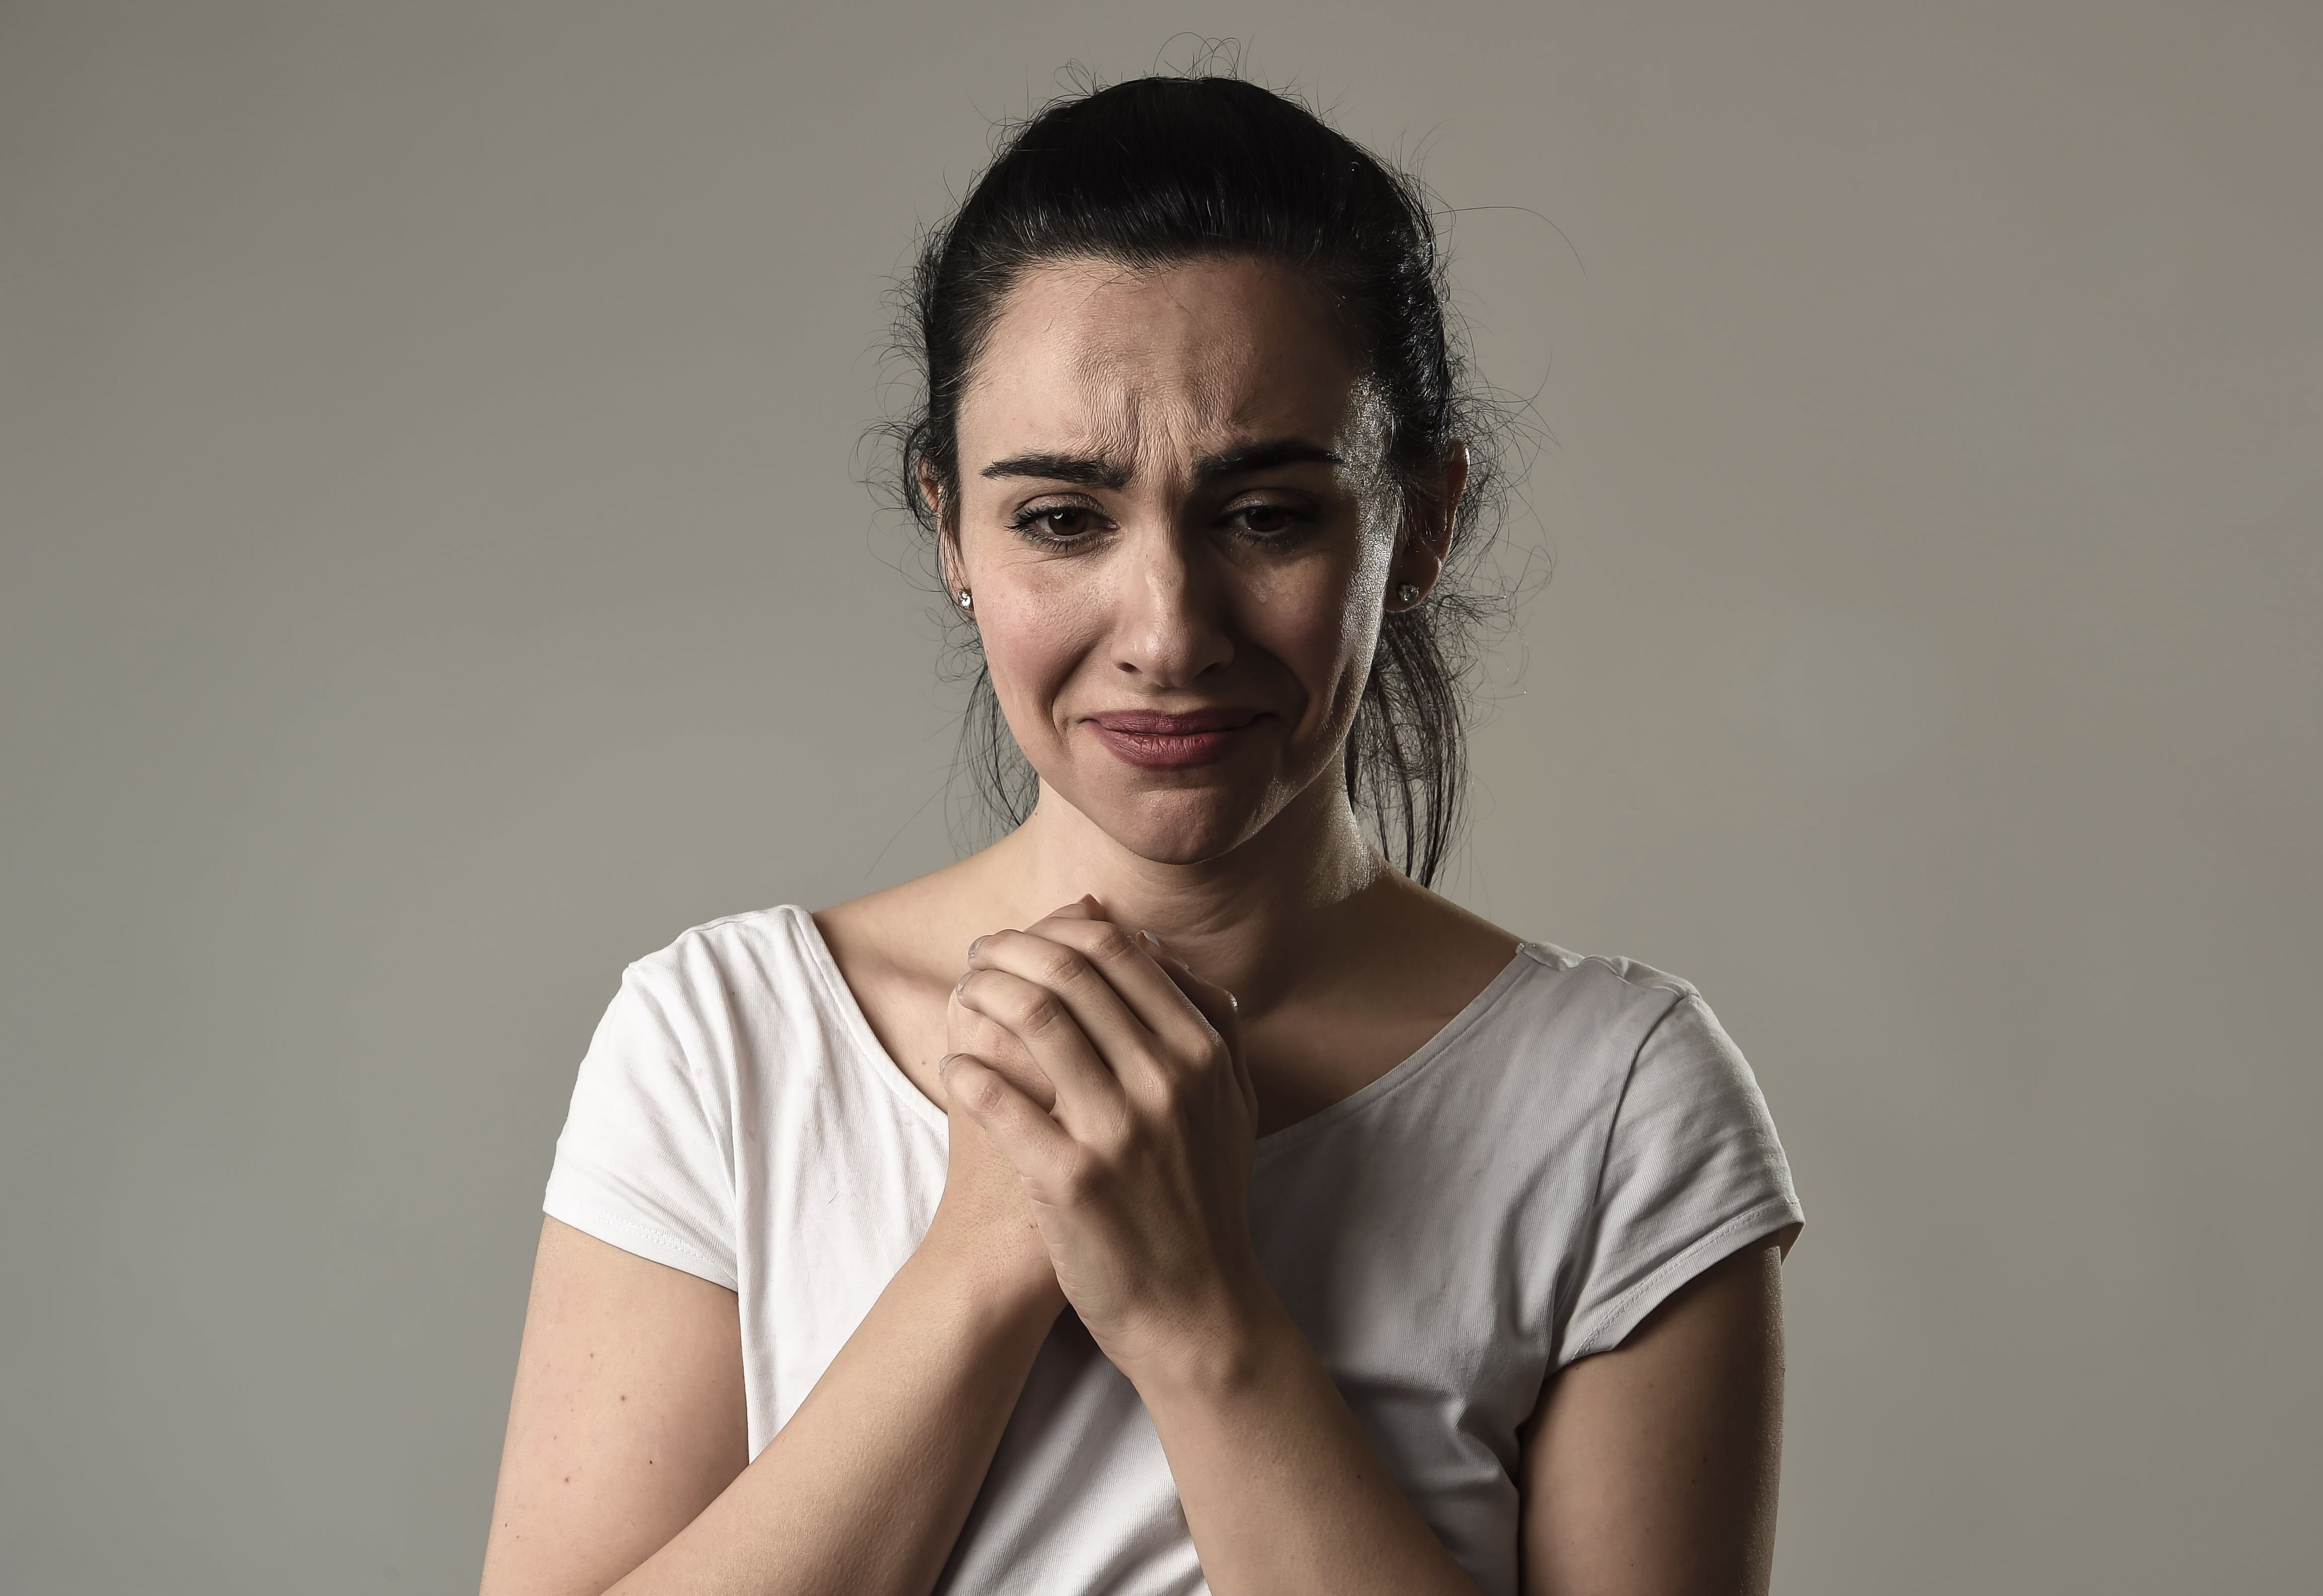 A woman crying. │Source: Shutterstock